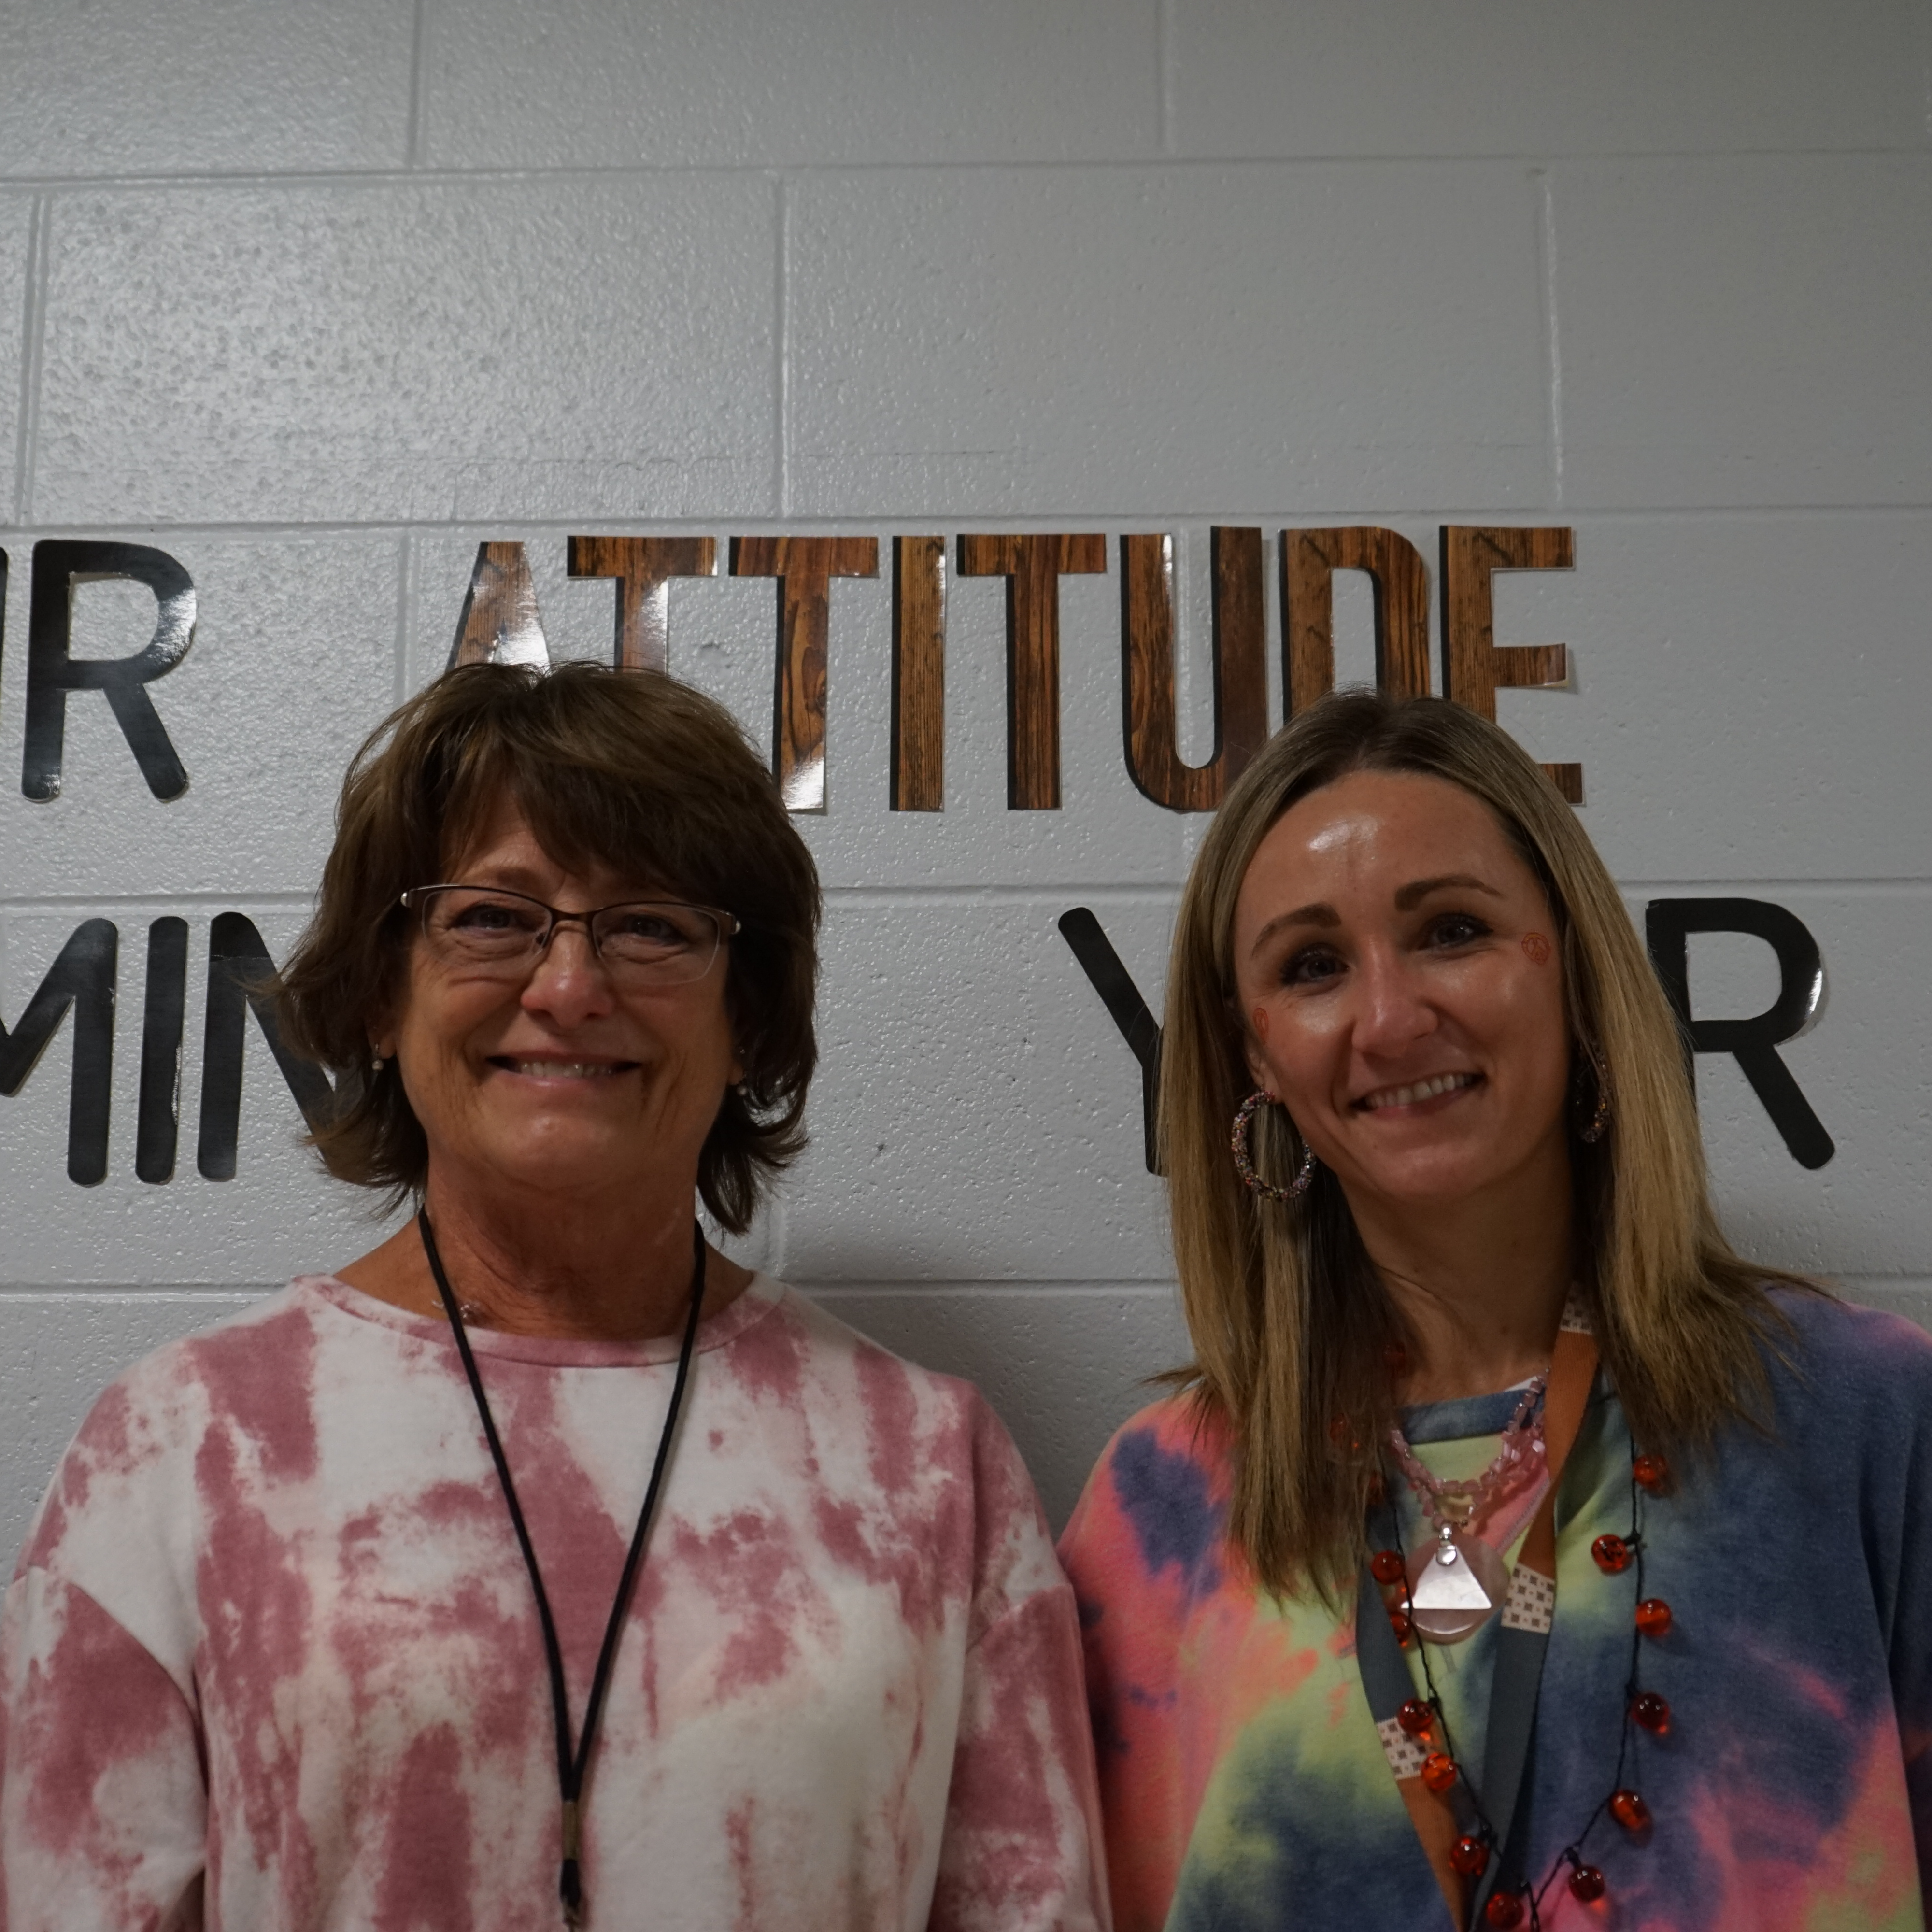 September Paraeducator of the month - Carrie Naranjo